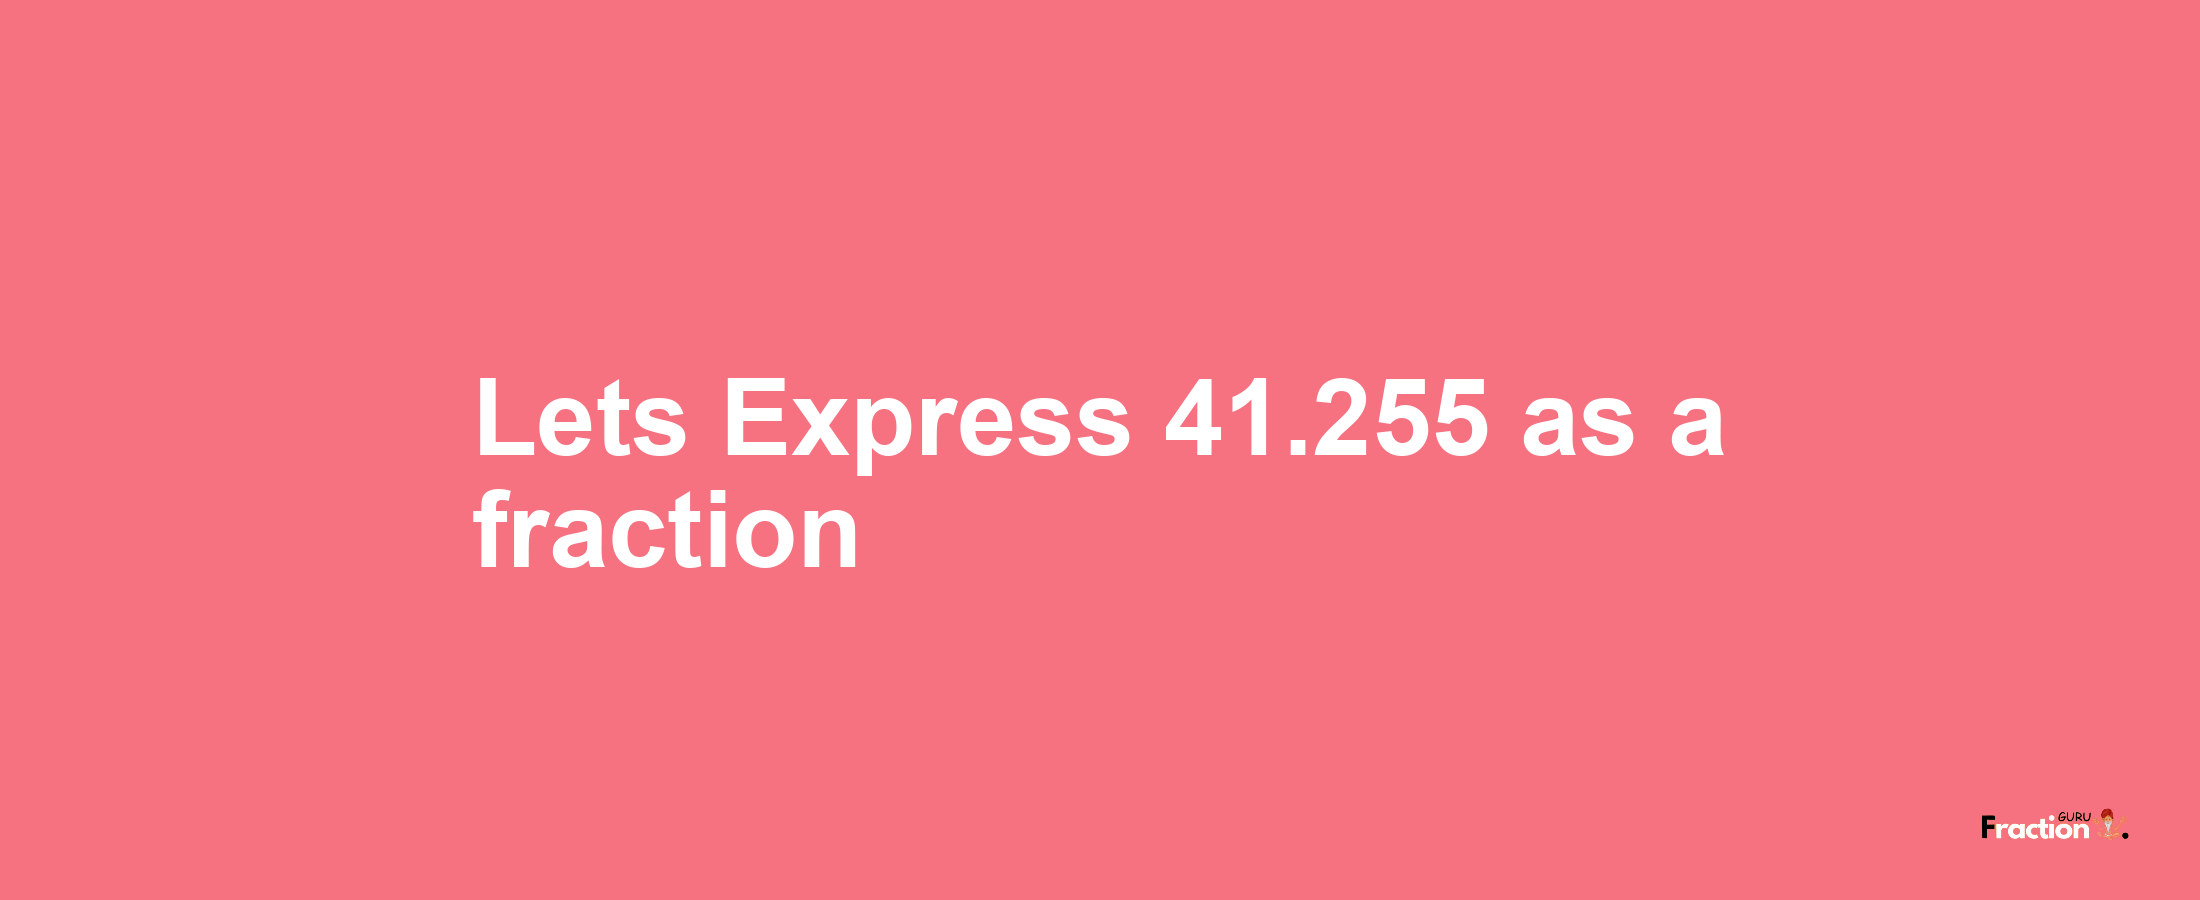 Lets Express 41.255 as afraction